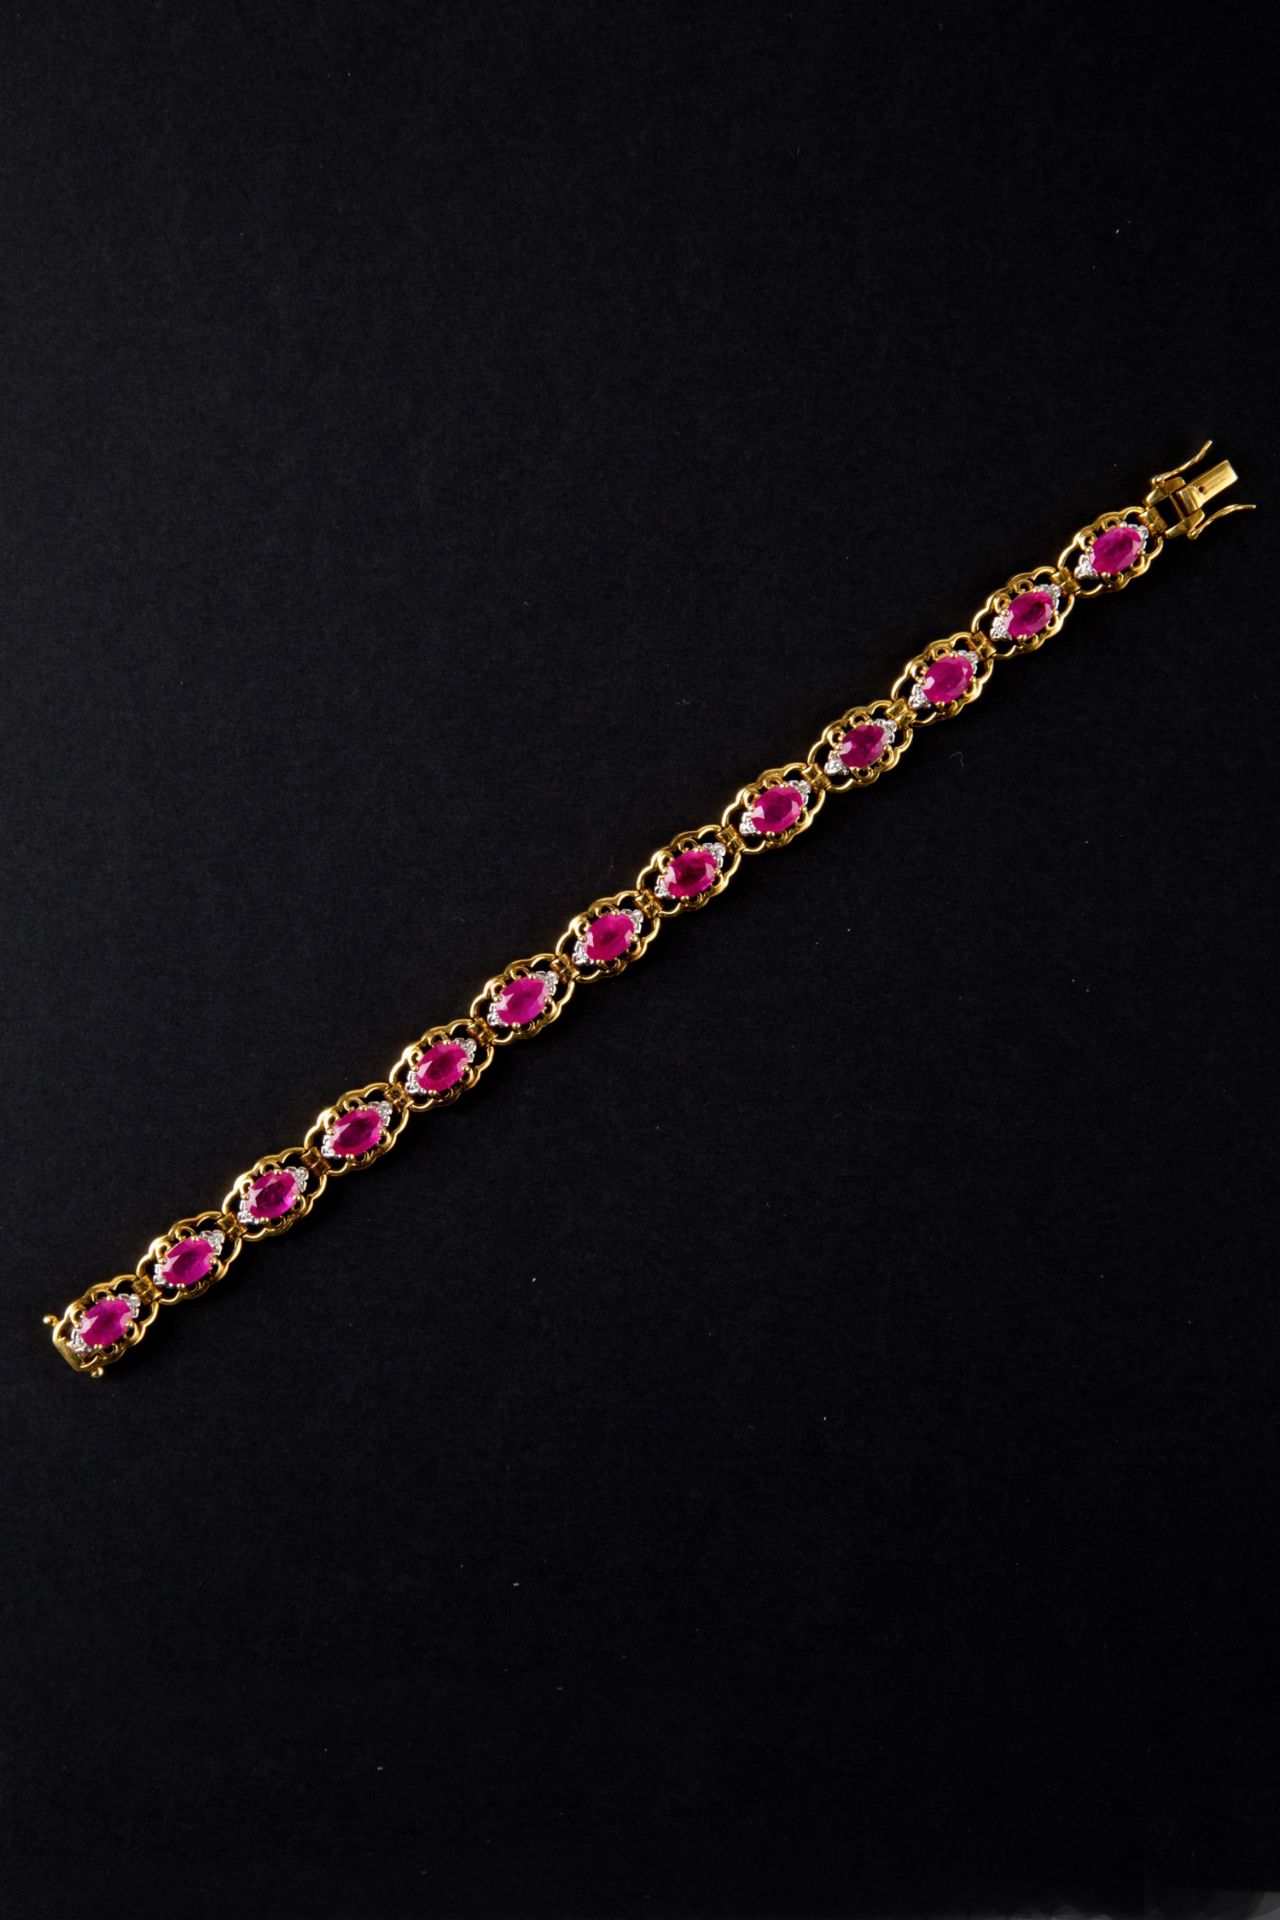 Bracelet in gold, rubies and diamonds